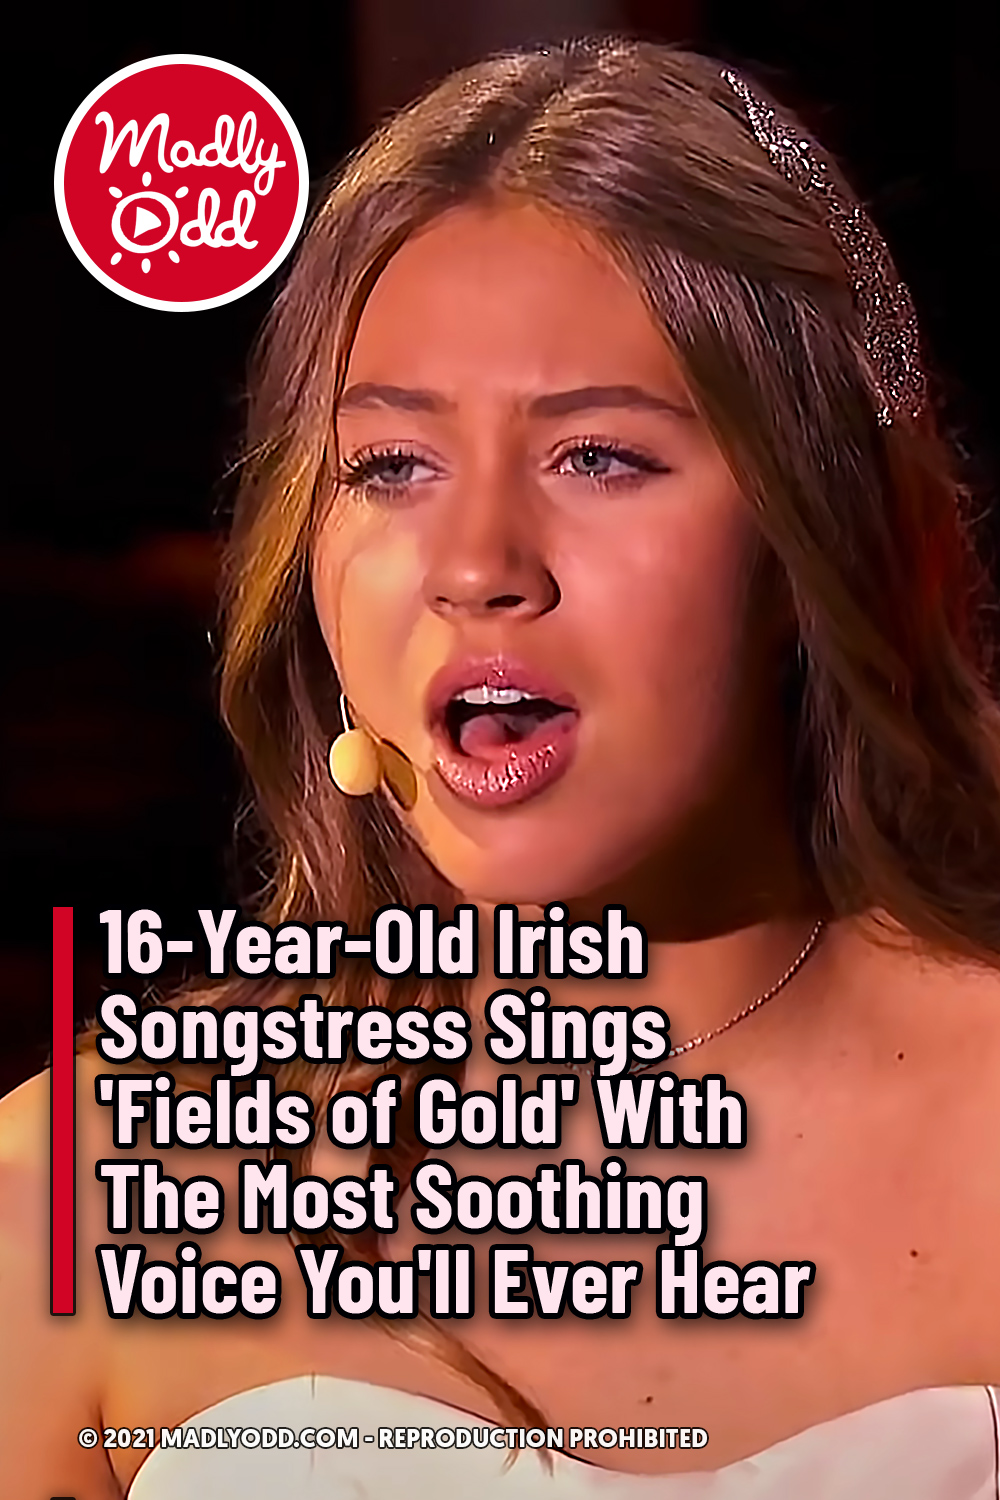 16-Year-Old Irish Songstress Sings \'Fields of Gold\' With The Most Soothing Voice You\'ll Ever Hear